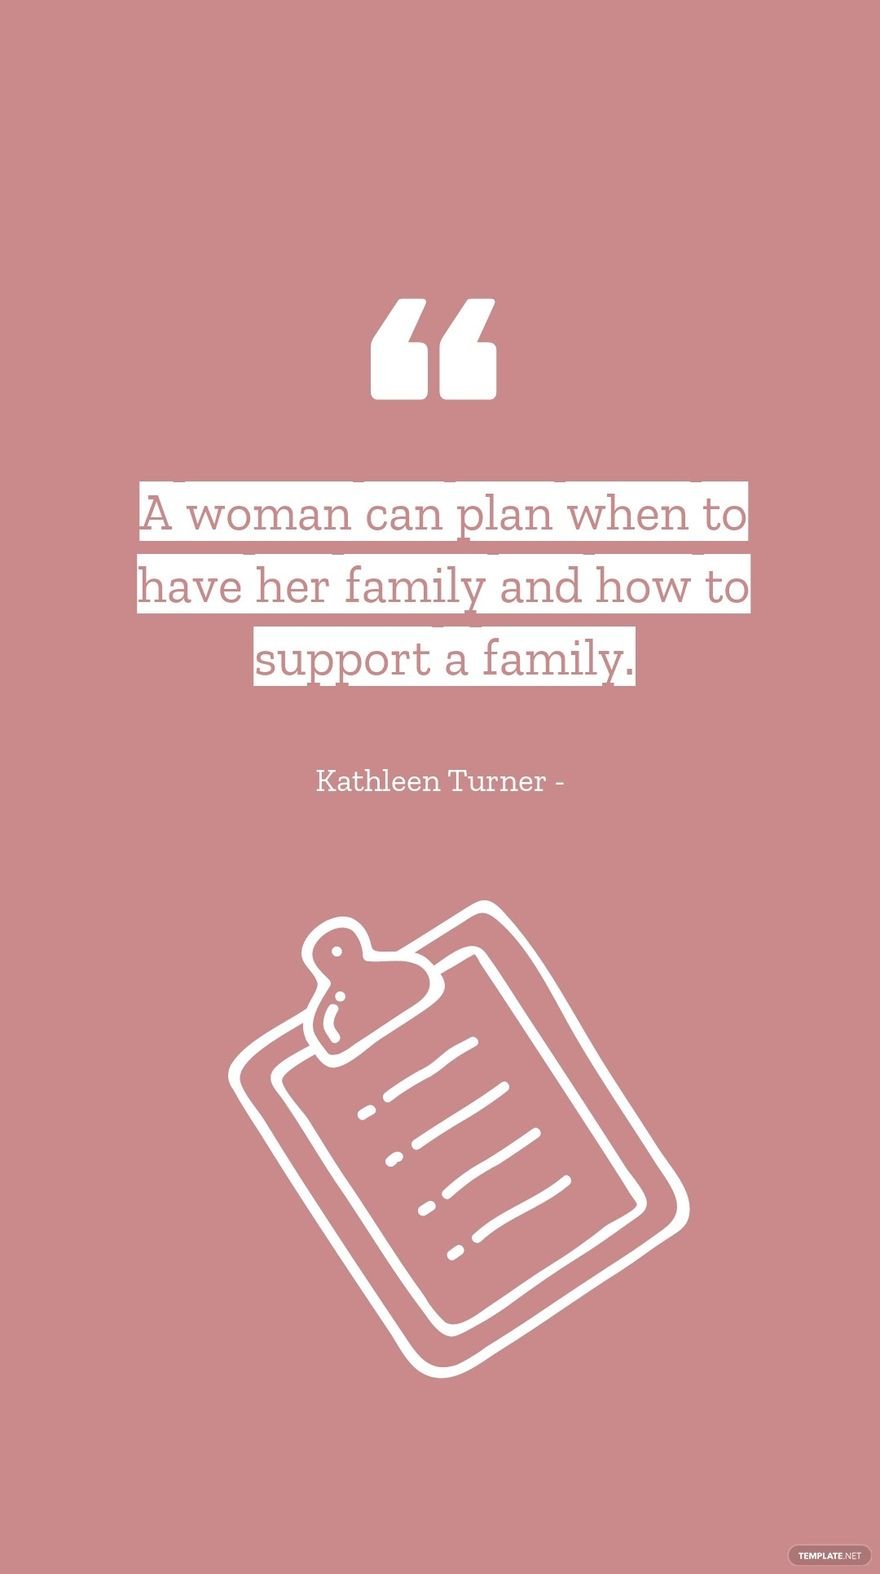 Free Kathleen Turner - A woman can plan when to have her family and how to support a family. in JPG